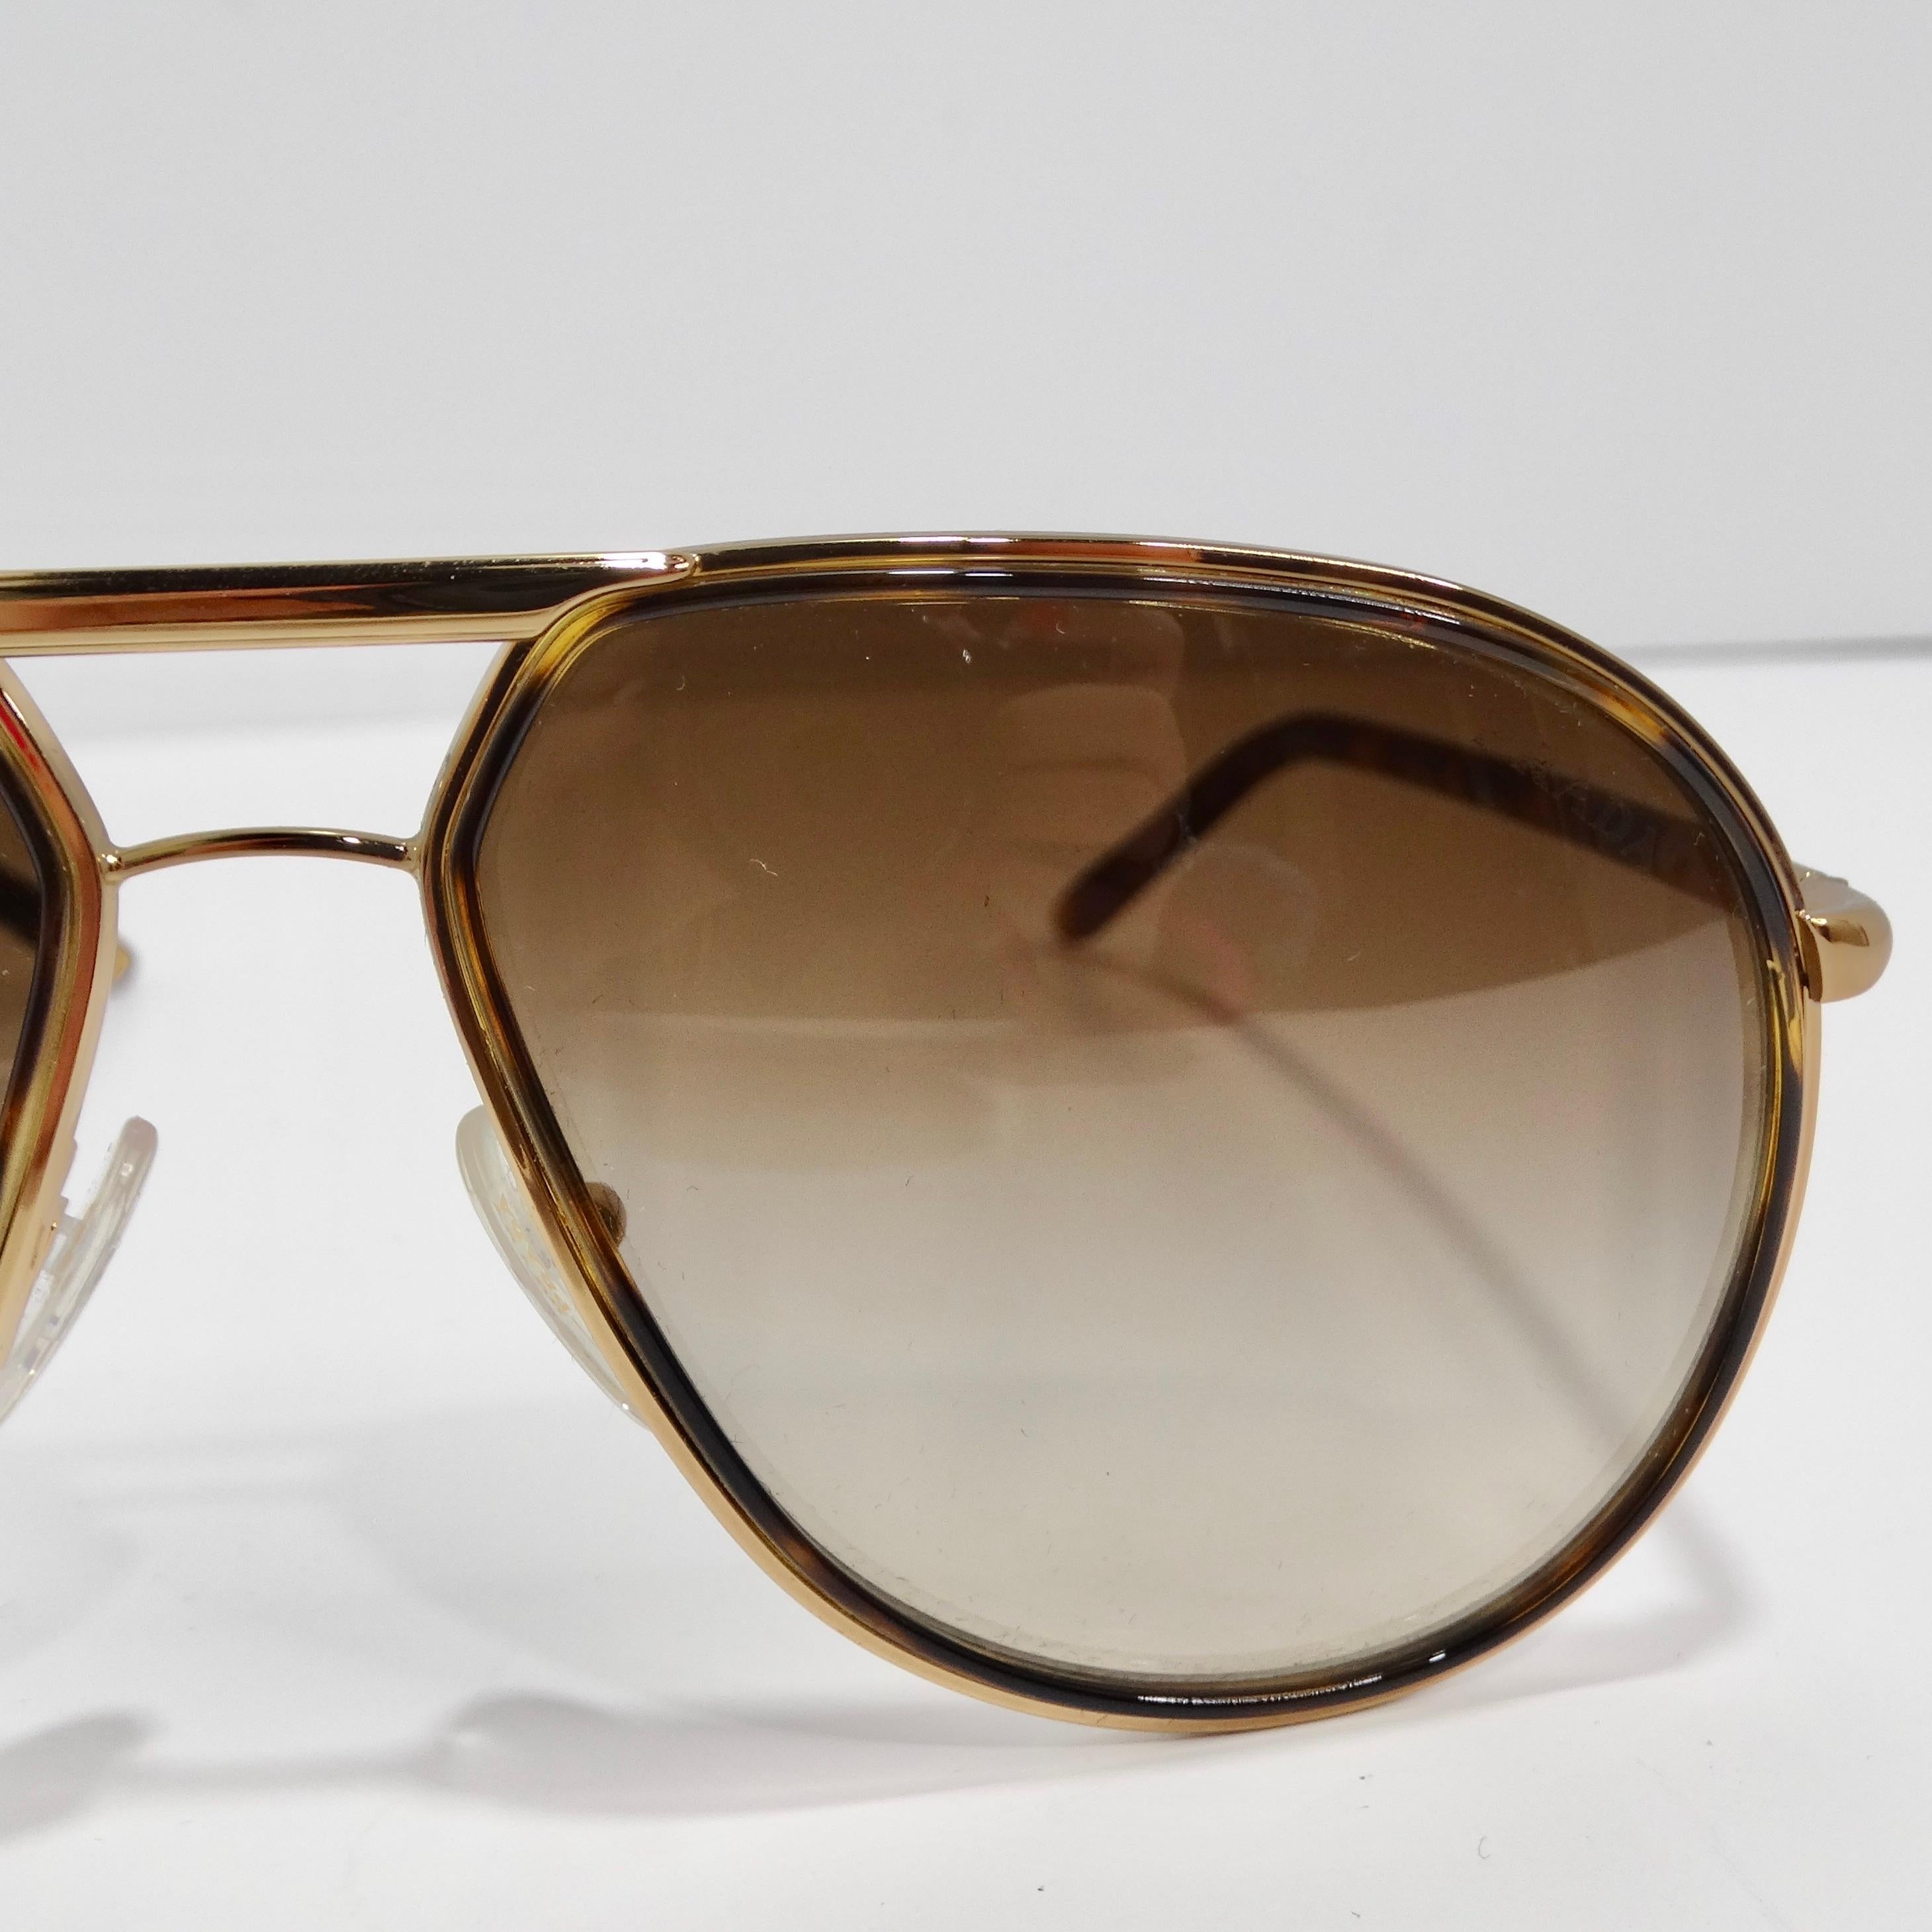 Elevate your style with the Prada 1990s Gold Tone Tortoise Shell Aviator Sunglasses, a classic aviator design that exudes timeless chic and sophistication. These sunglasses feature thin gold-tone rims, complemented by brown tortoise shell arms